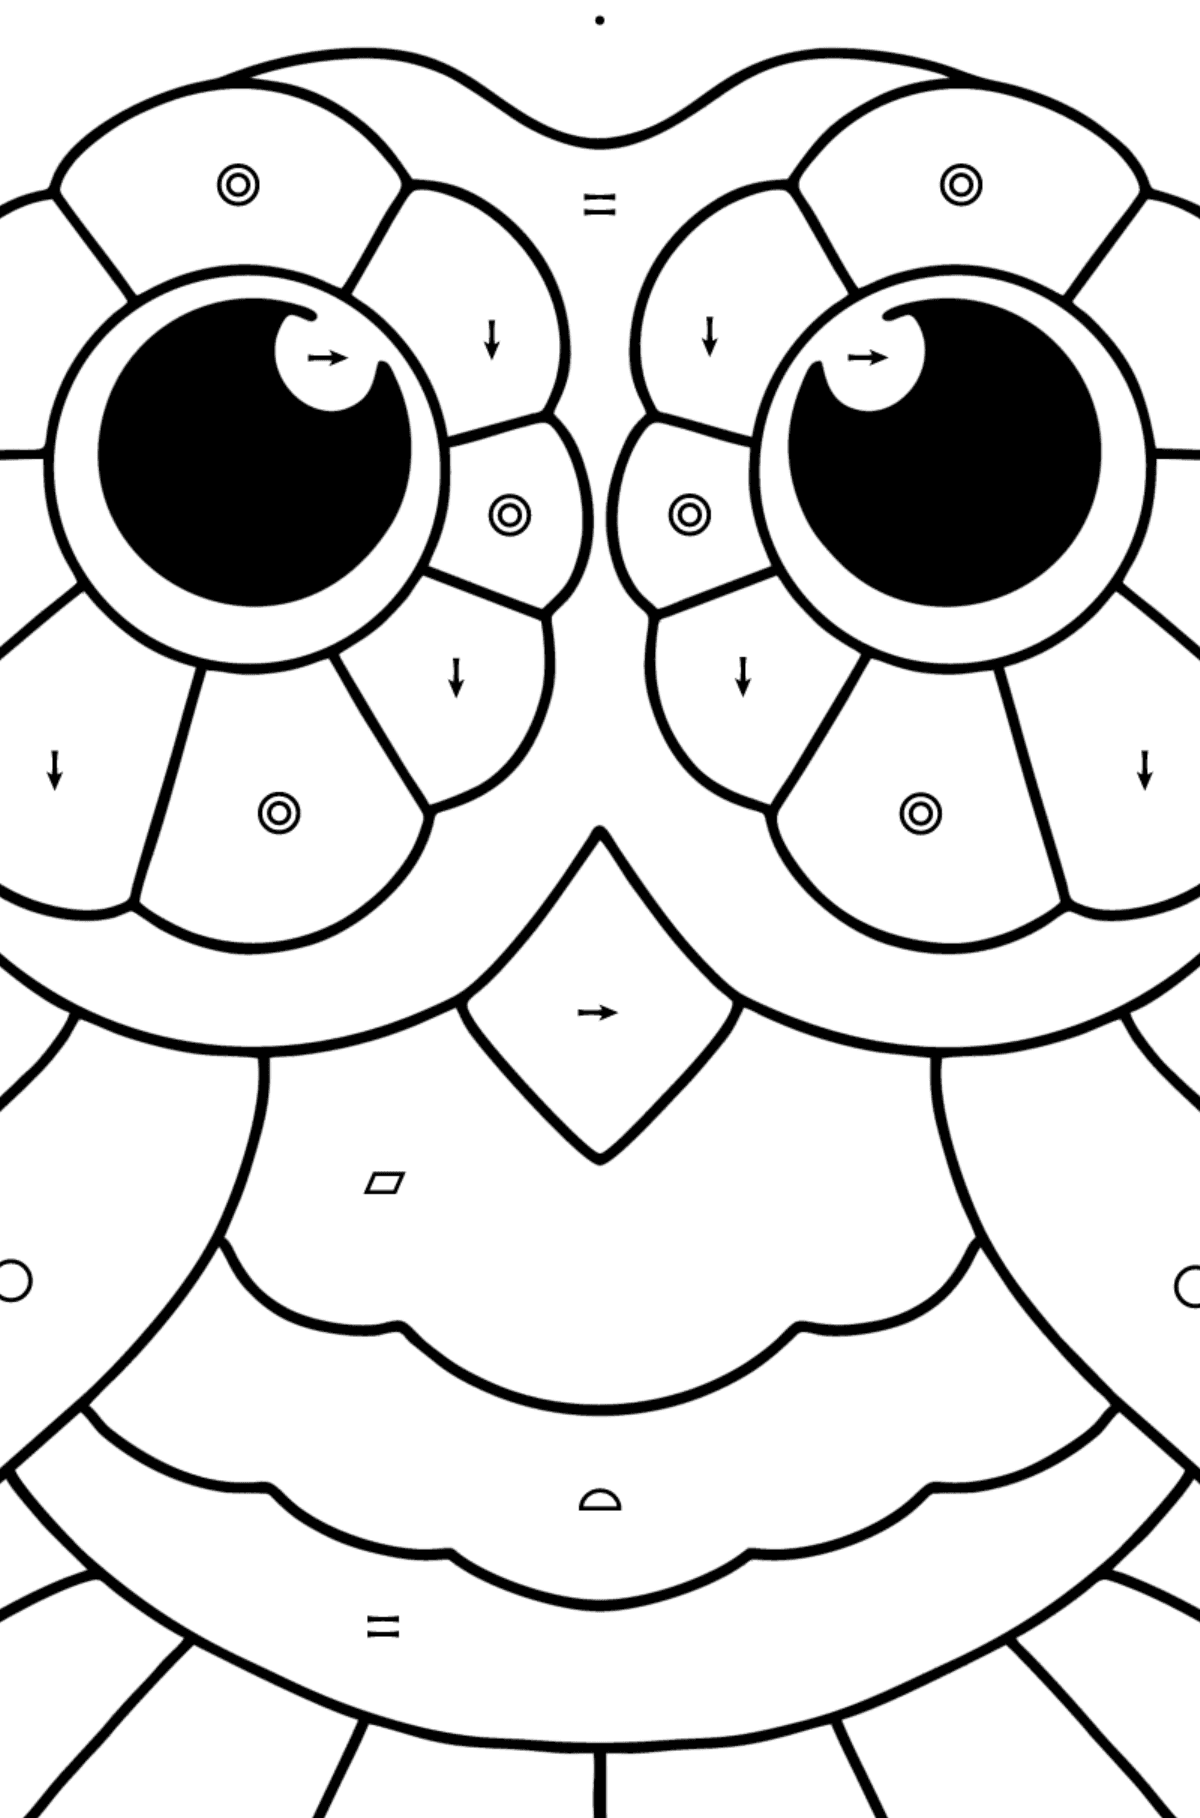 Easy stress relief coloring page - Owl - Coloring by Symbols and Geometric Shapes for Kids